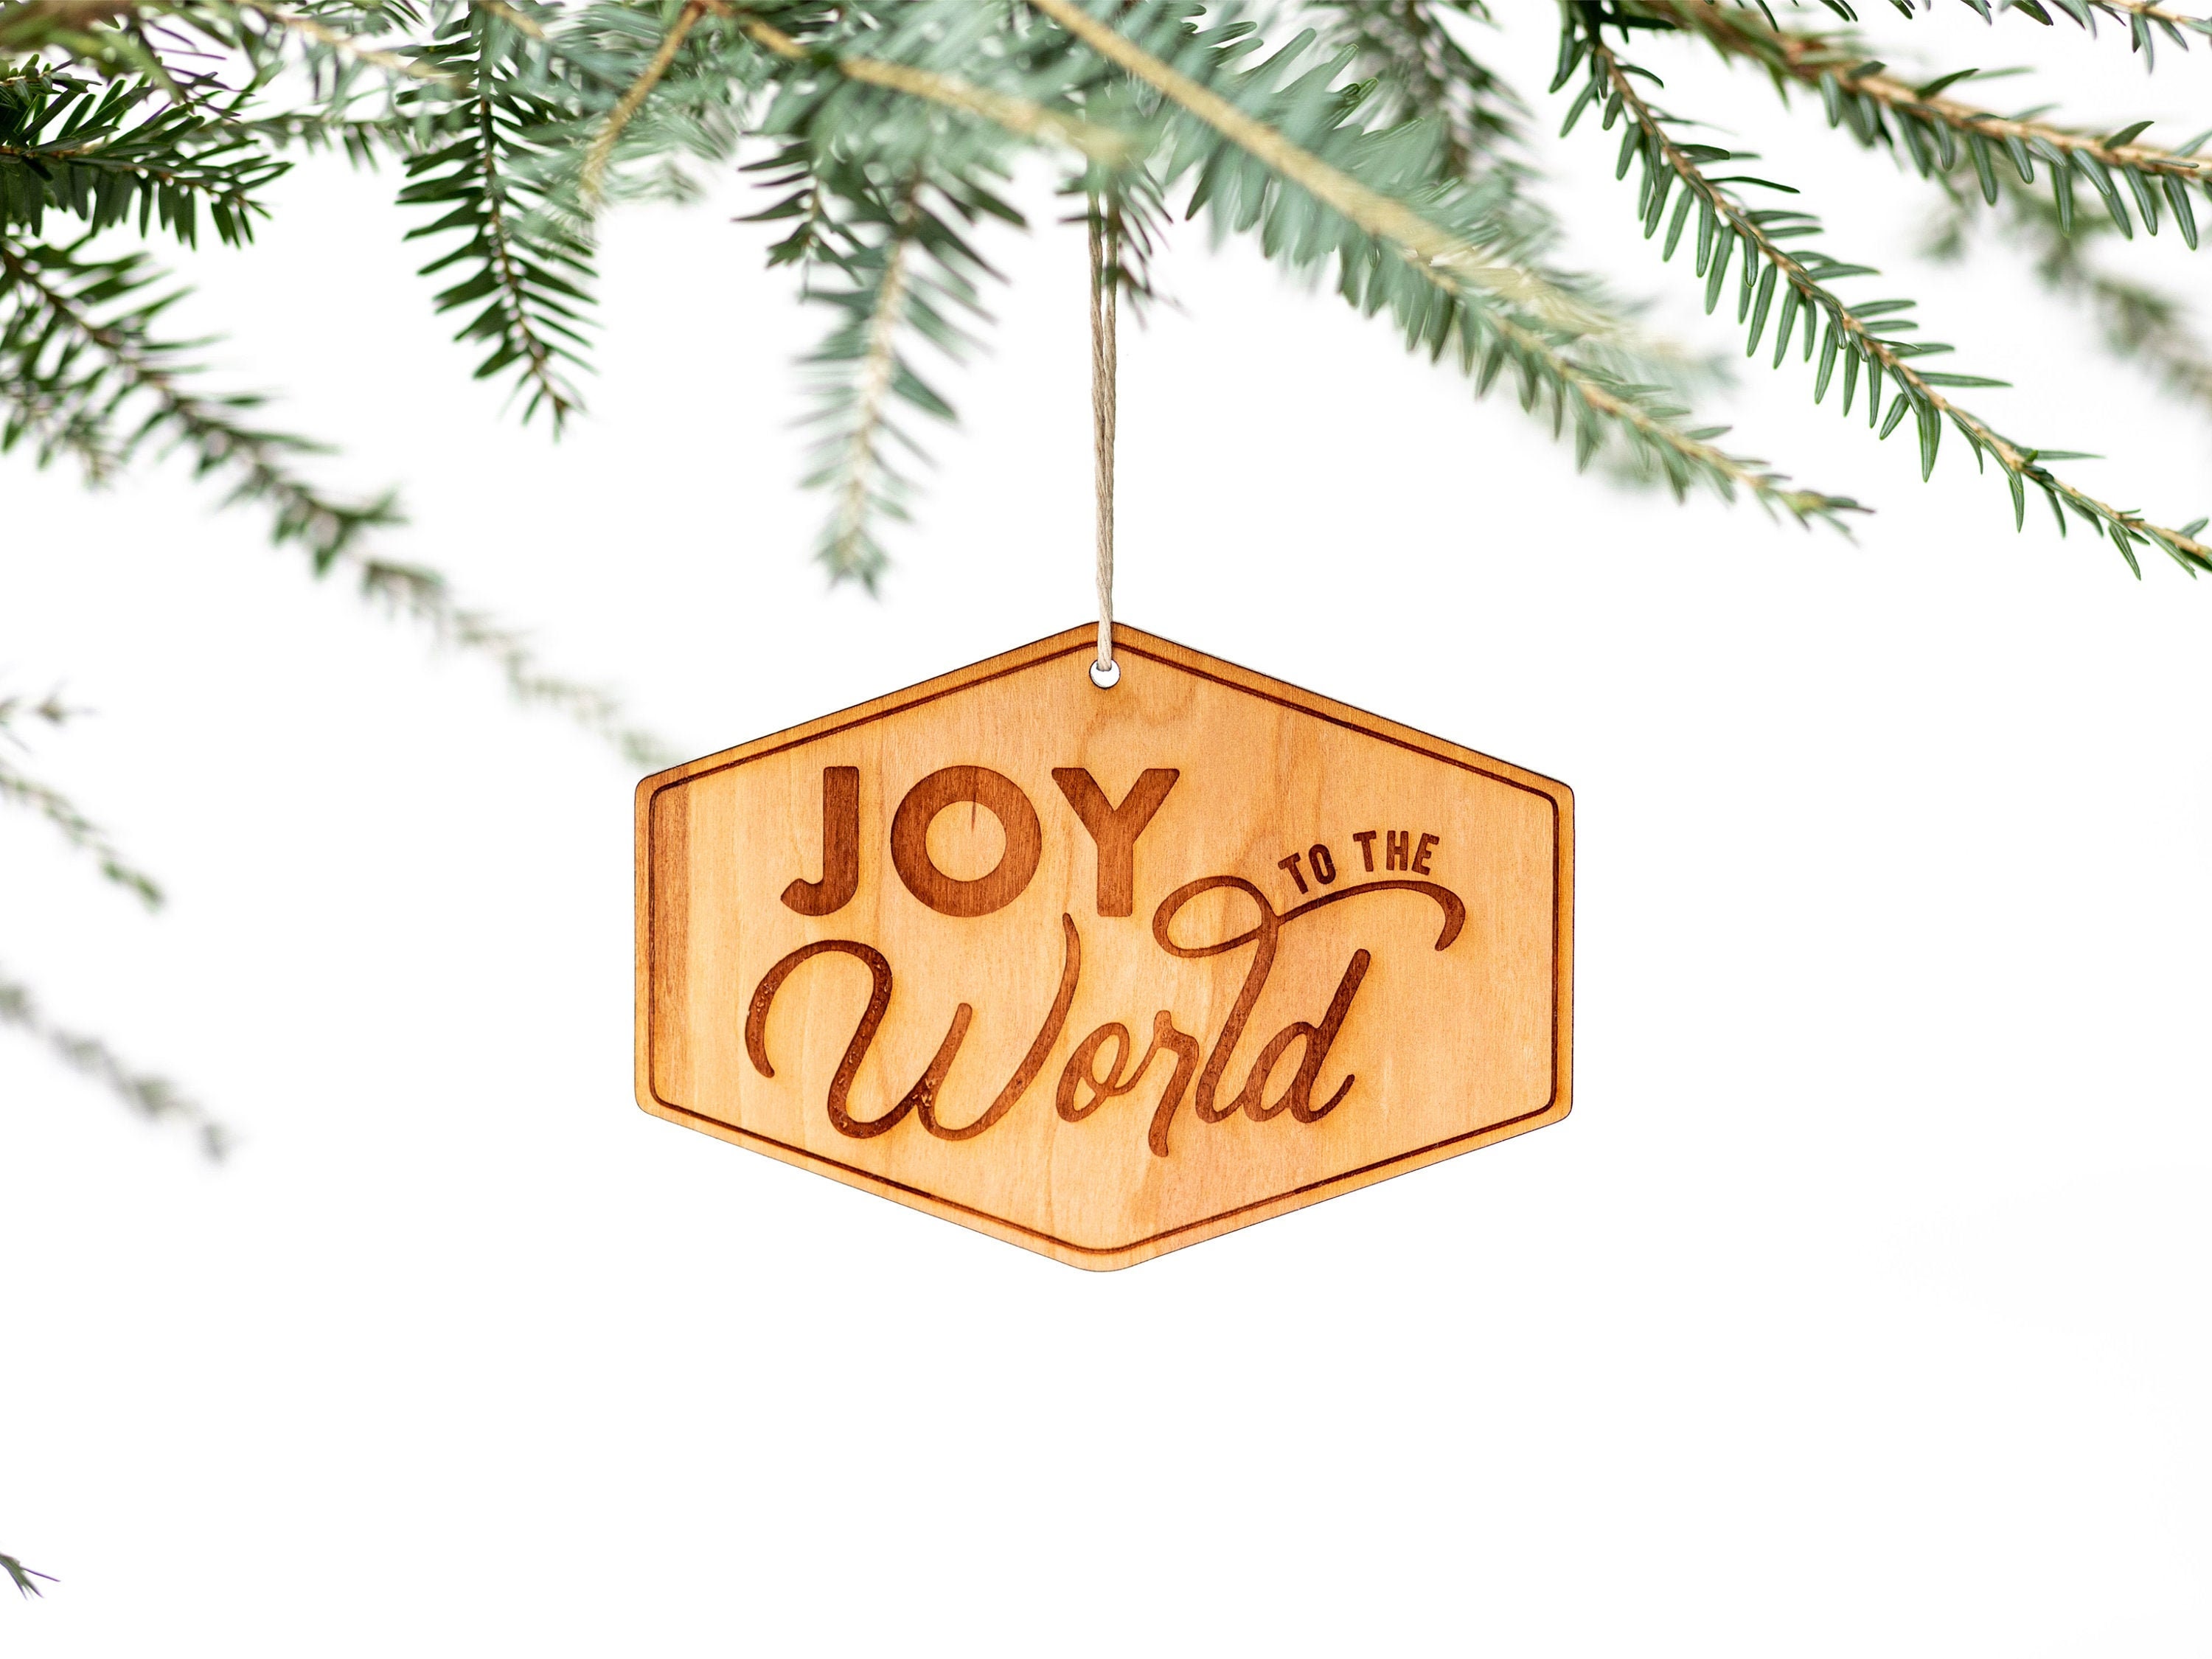 Joy to the World Engraved Wooden Christmas Ornament modern - Etsy